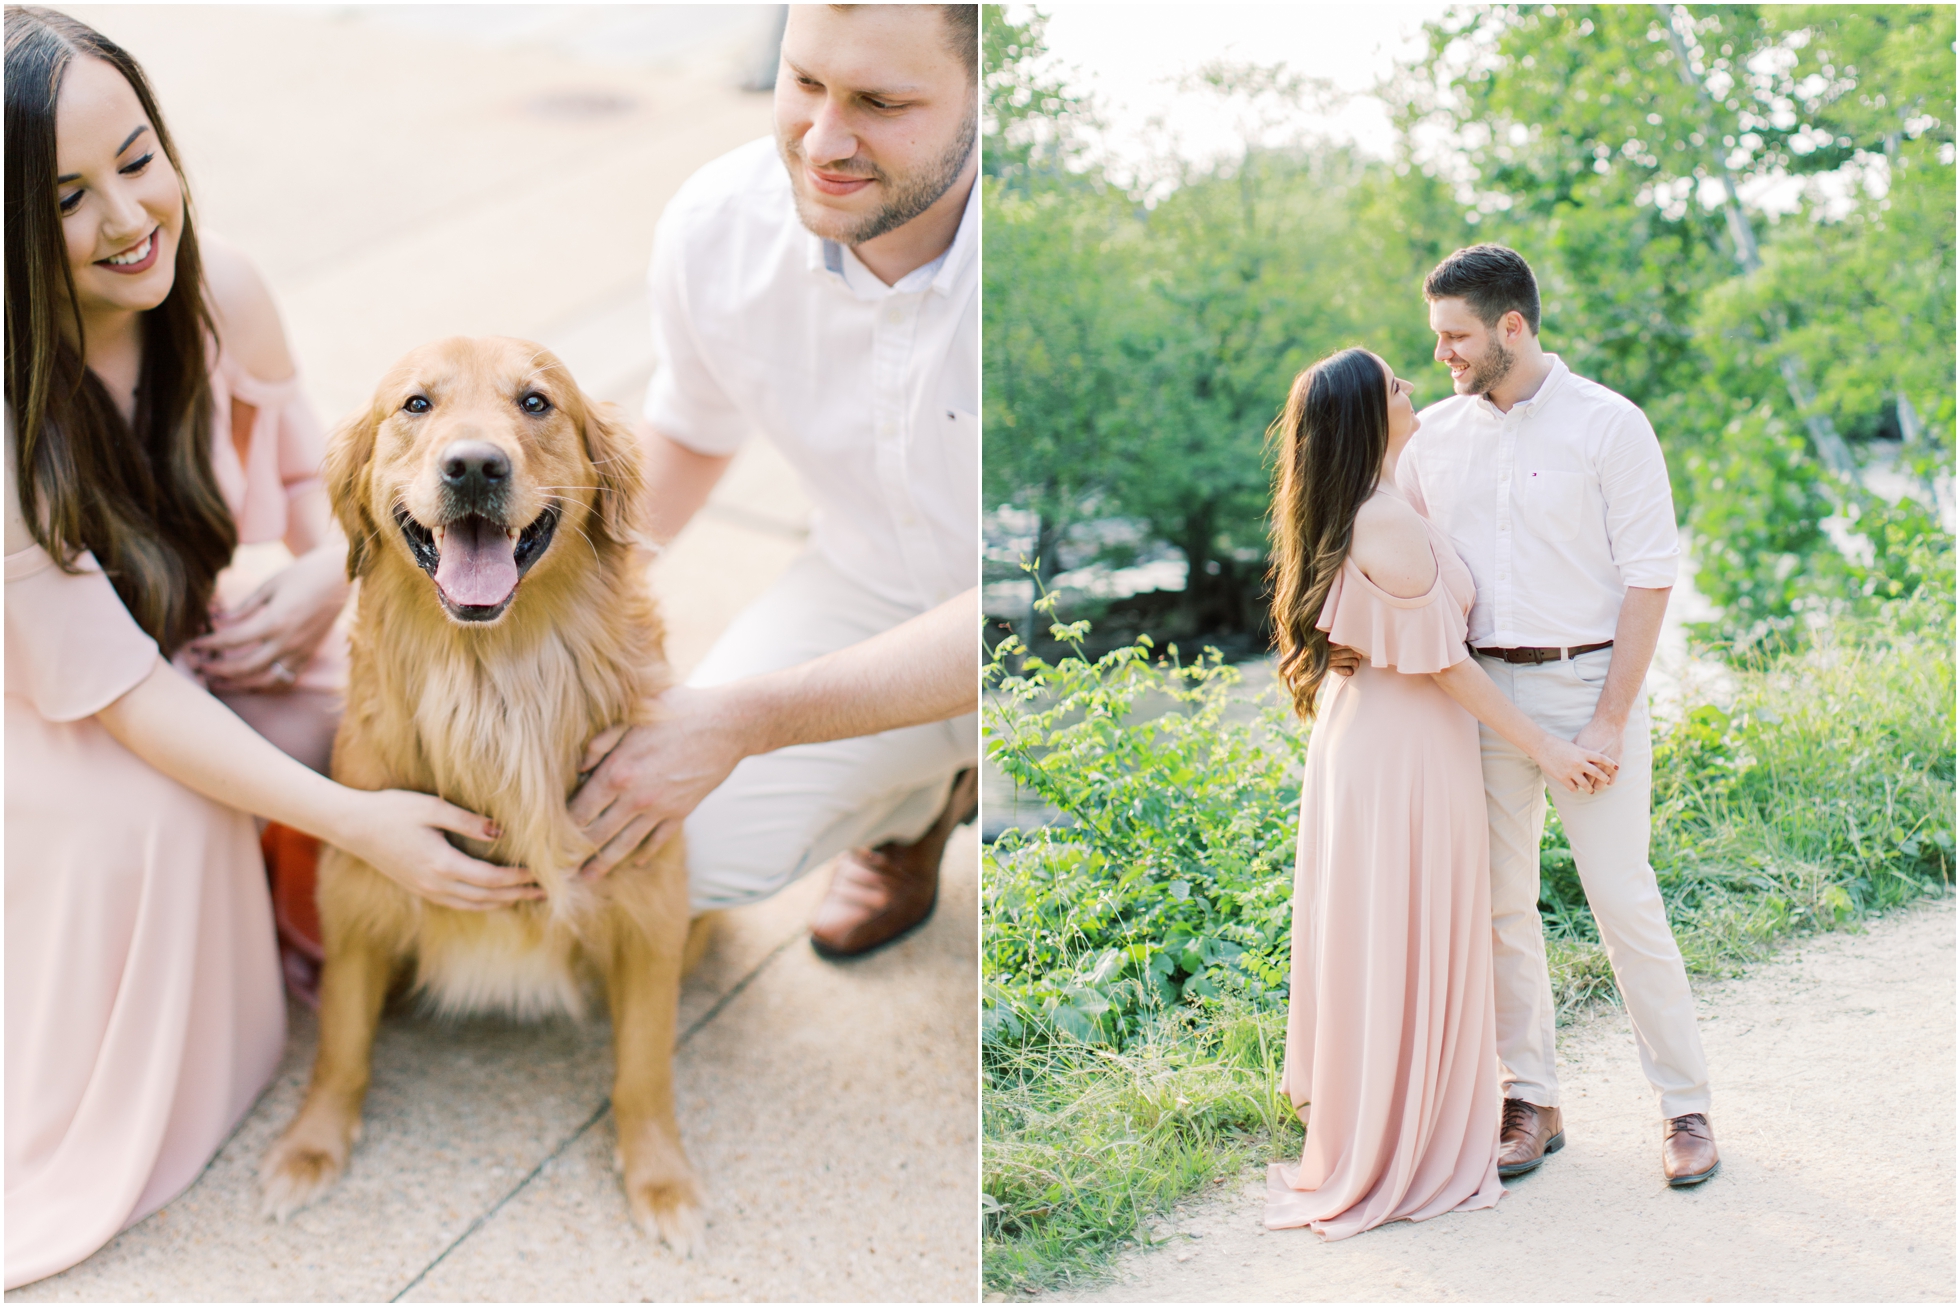 A Lush, Nature-filled Engagement Session at the Billy Goat Trail in Great Falls, MD 